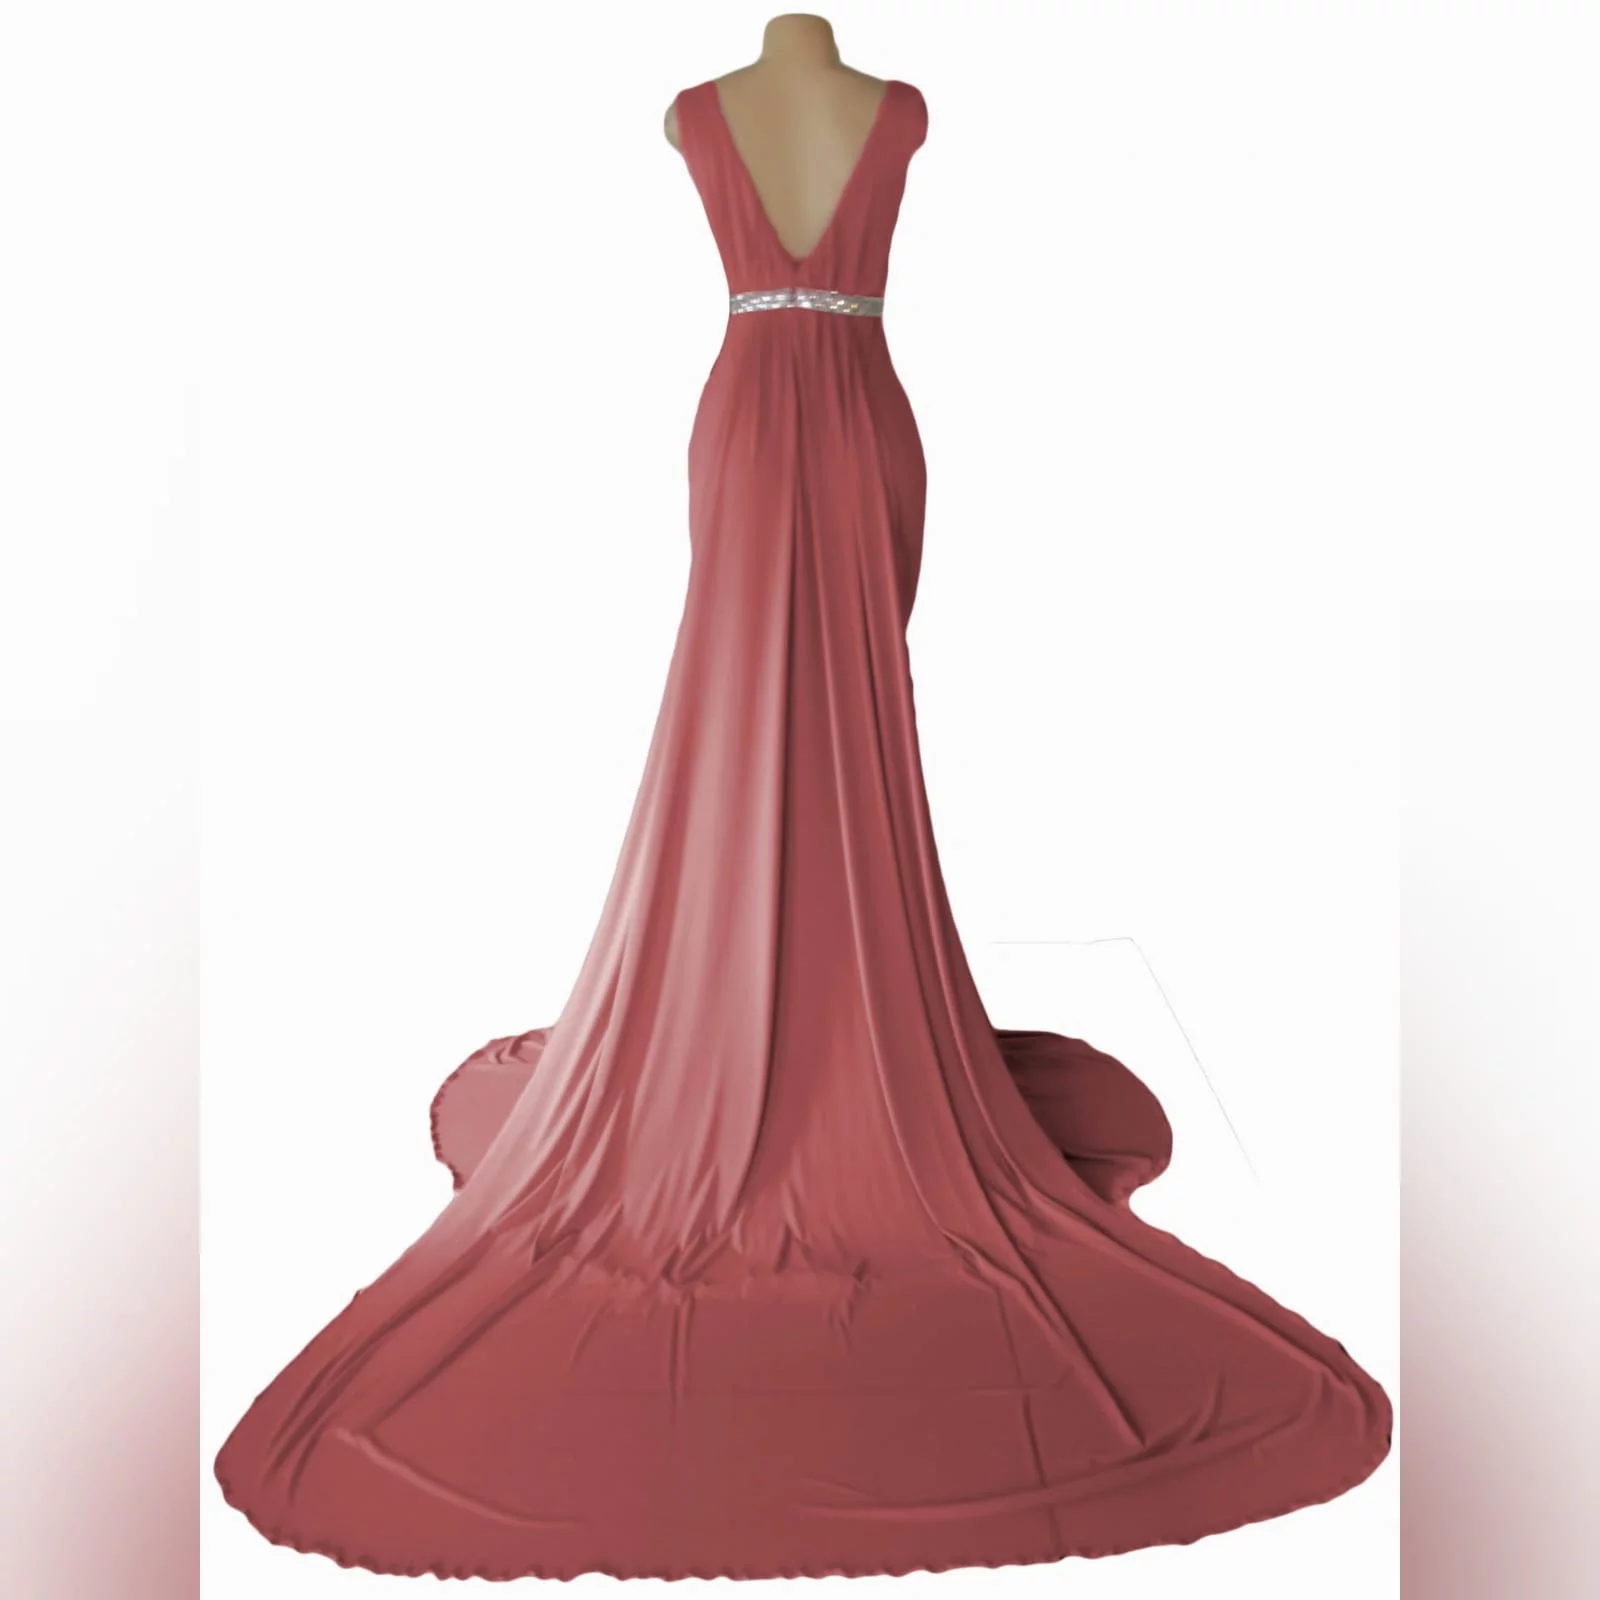 Dusty pink soft mermaid formal dress 2 this dusty pink soft mermaid formal dress was specially made for a prom dance. With a slight gather on the bodice and a rounded neckline. Dress has a double train. The long train is attached to the beaded removable belt.